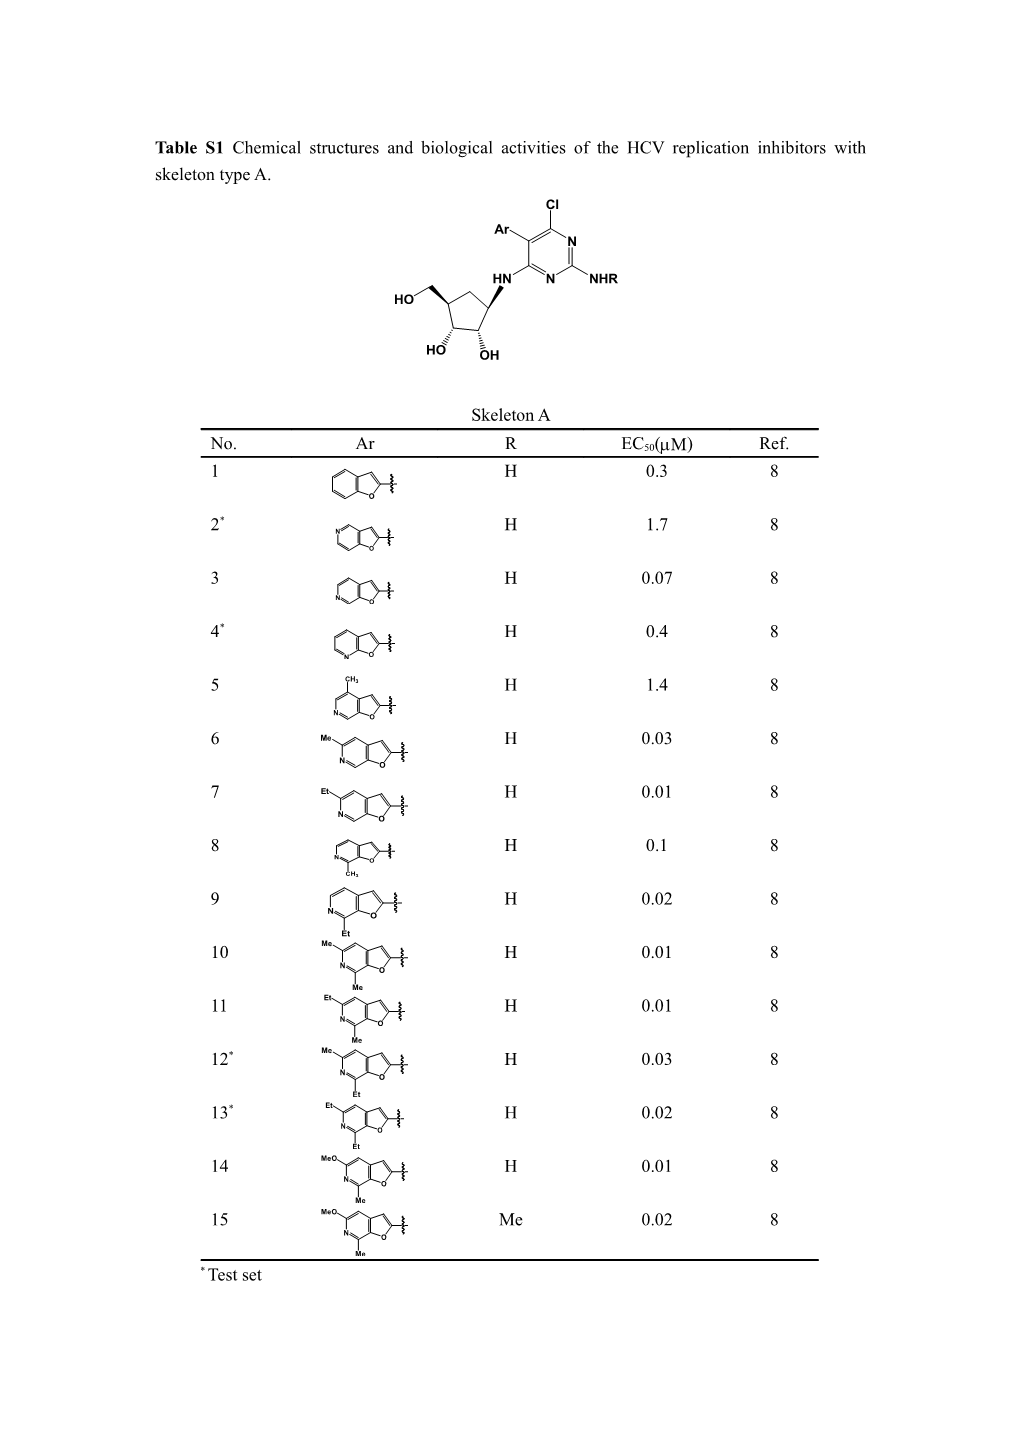 Table S1 Chemical Structures and Biological Activities of the HCV Replication Inhibitors